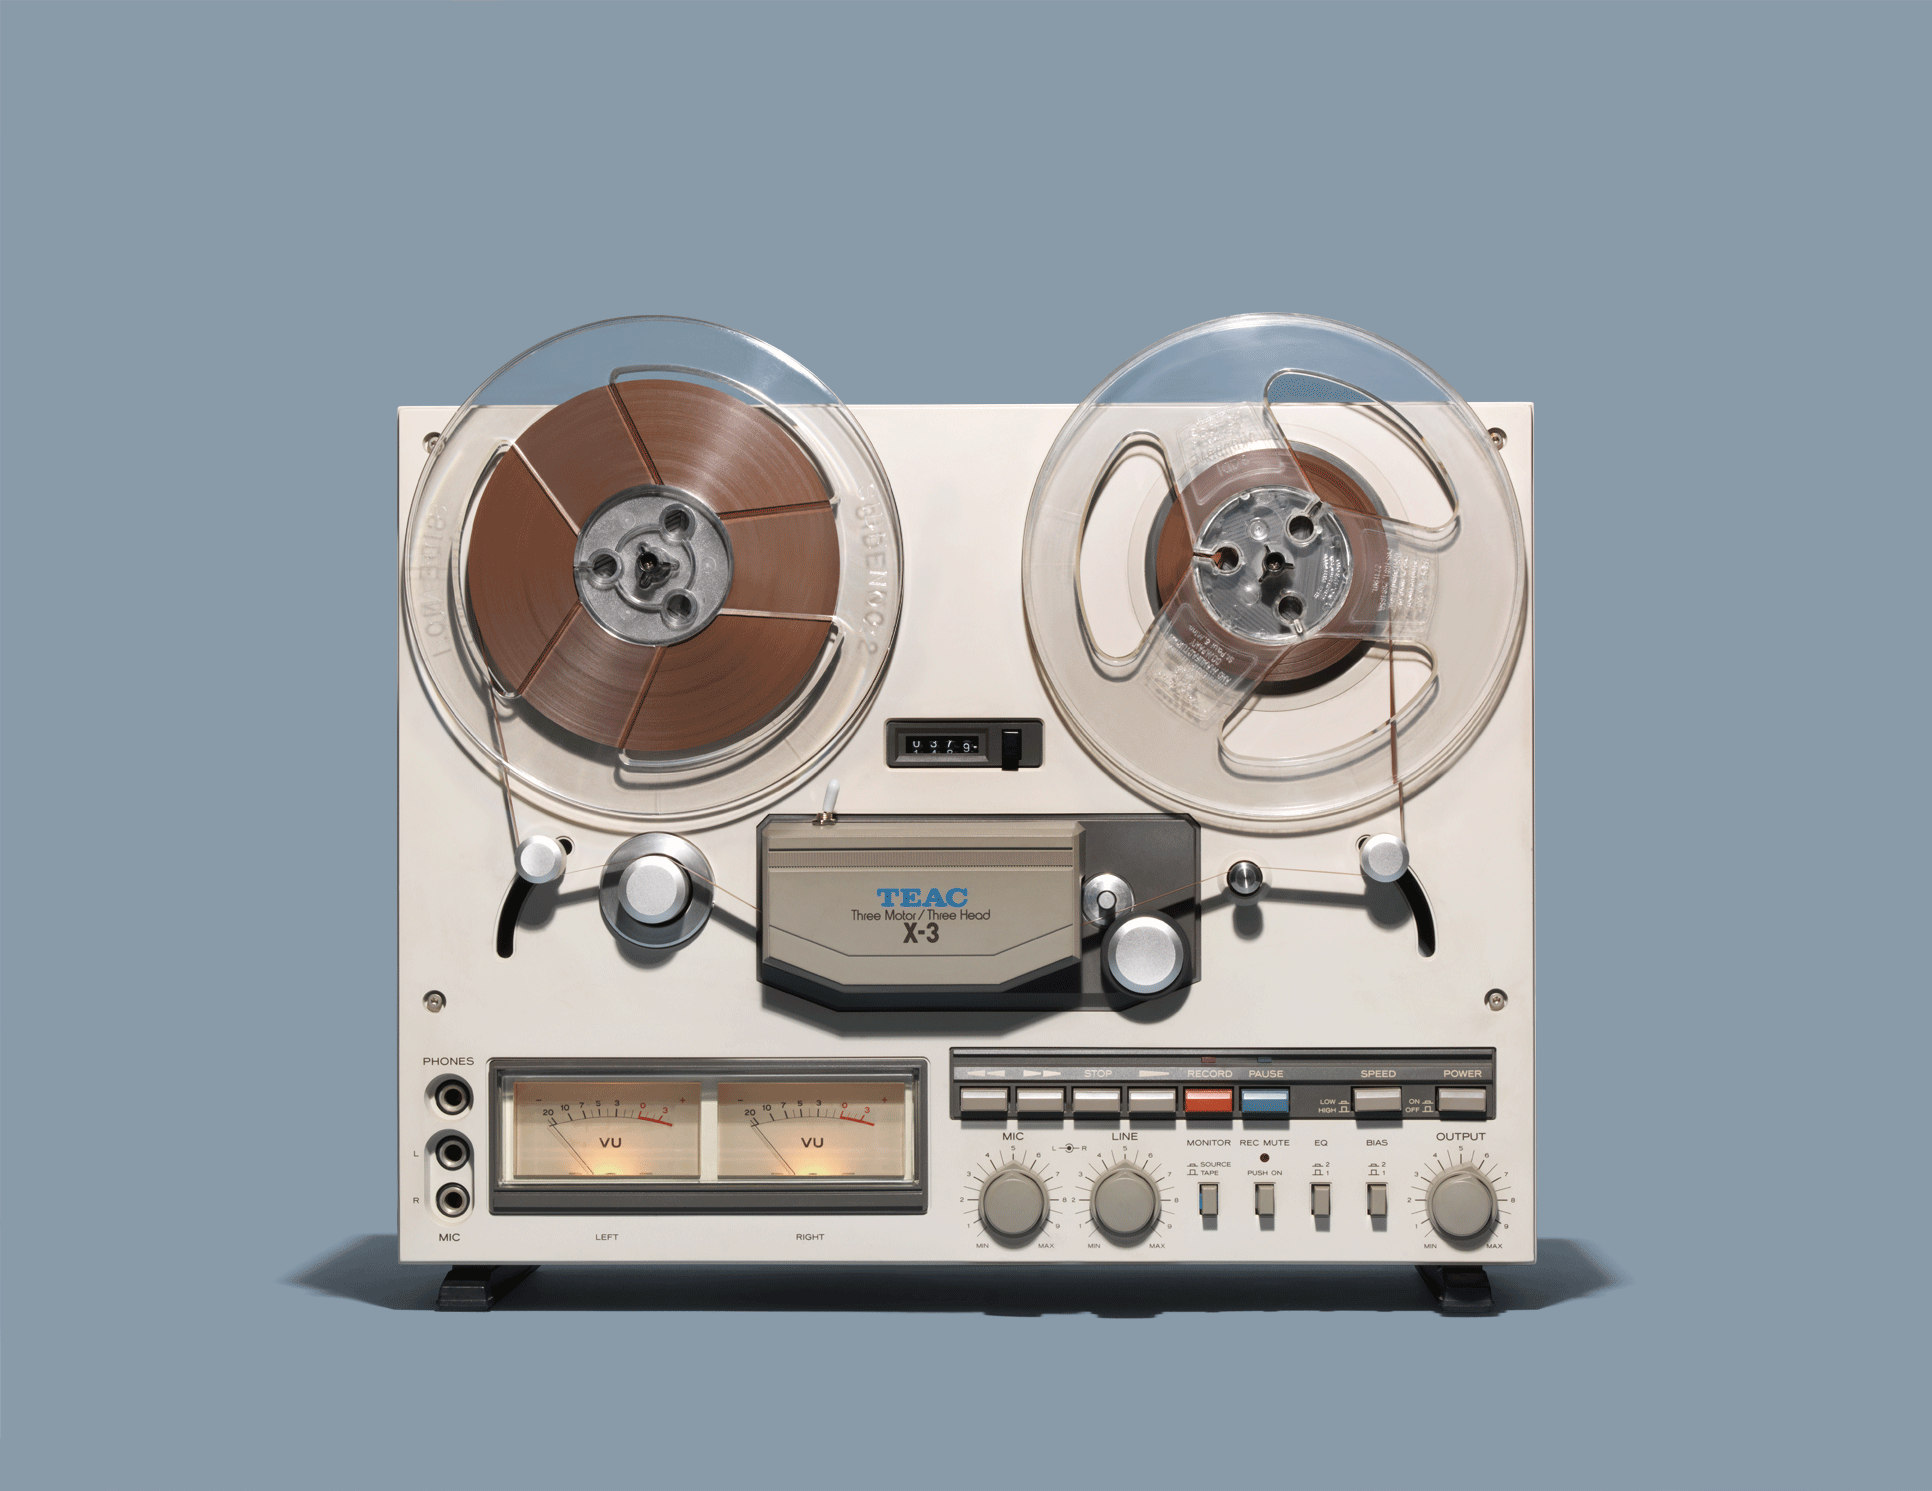 animated GIF of a reel to reel tape machine, relic